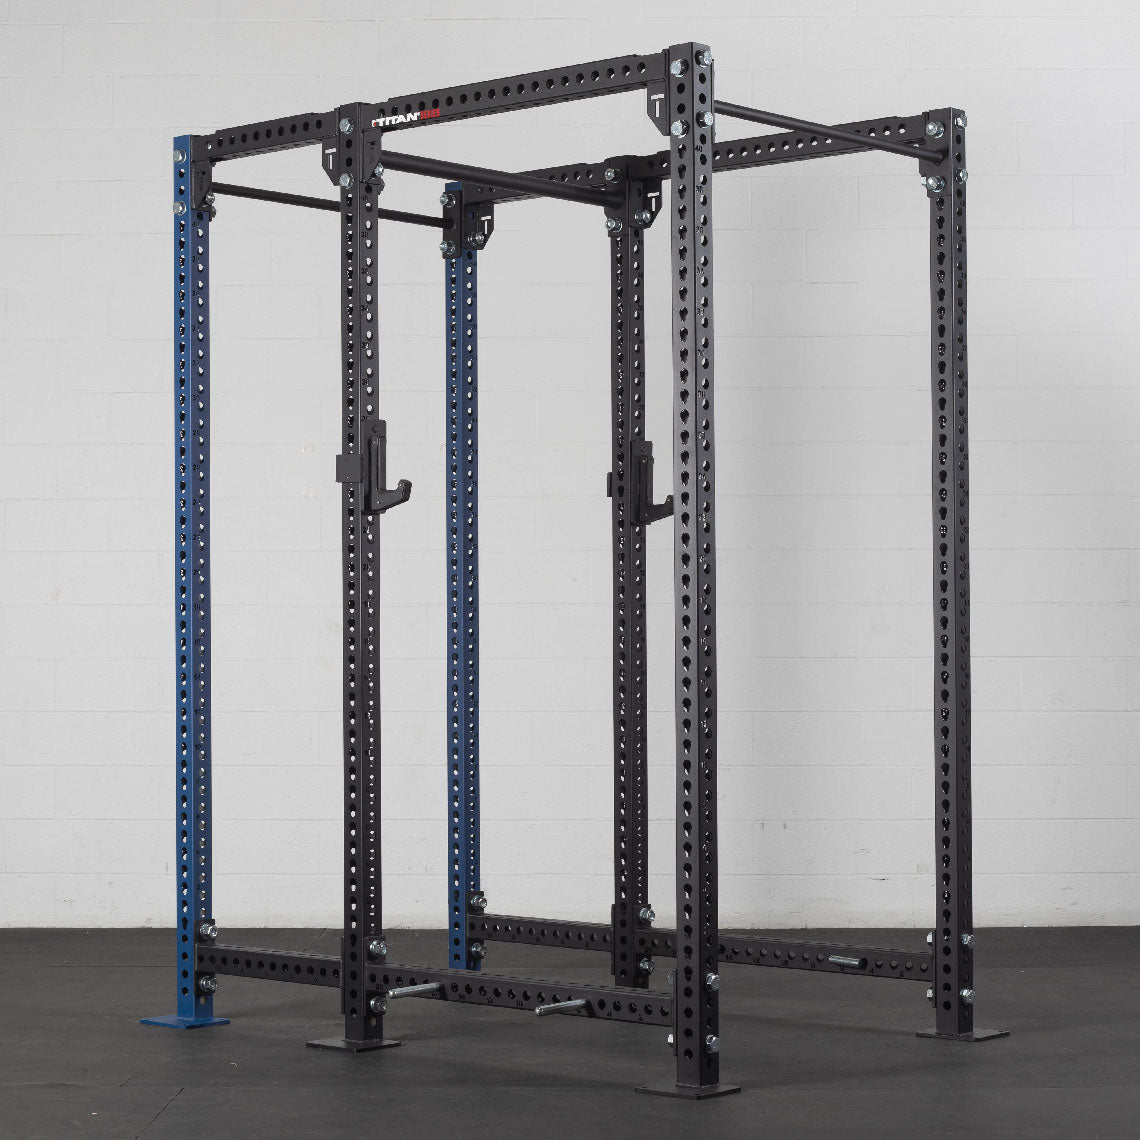 TITAN Series 24" Extension Kit - Extension Color: Navy - Extension Height: 100" - Crossmember: 1.25" Pull-Up Bar | Navy / 100" / 1.25" Pull-Up Bar